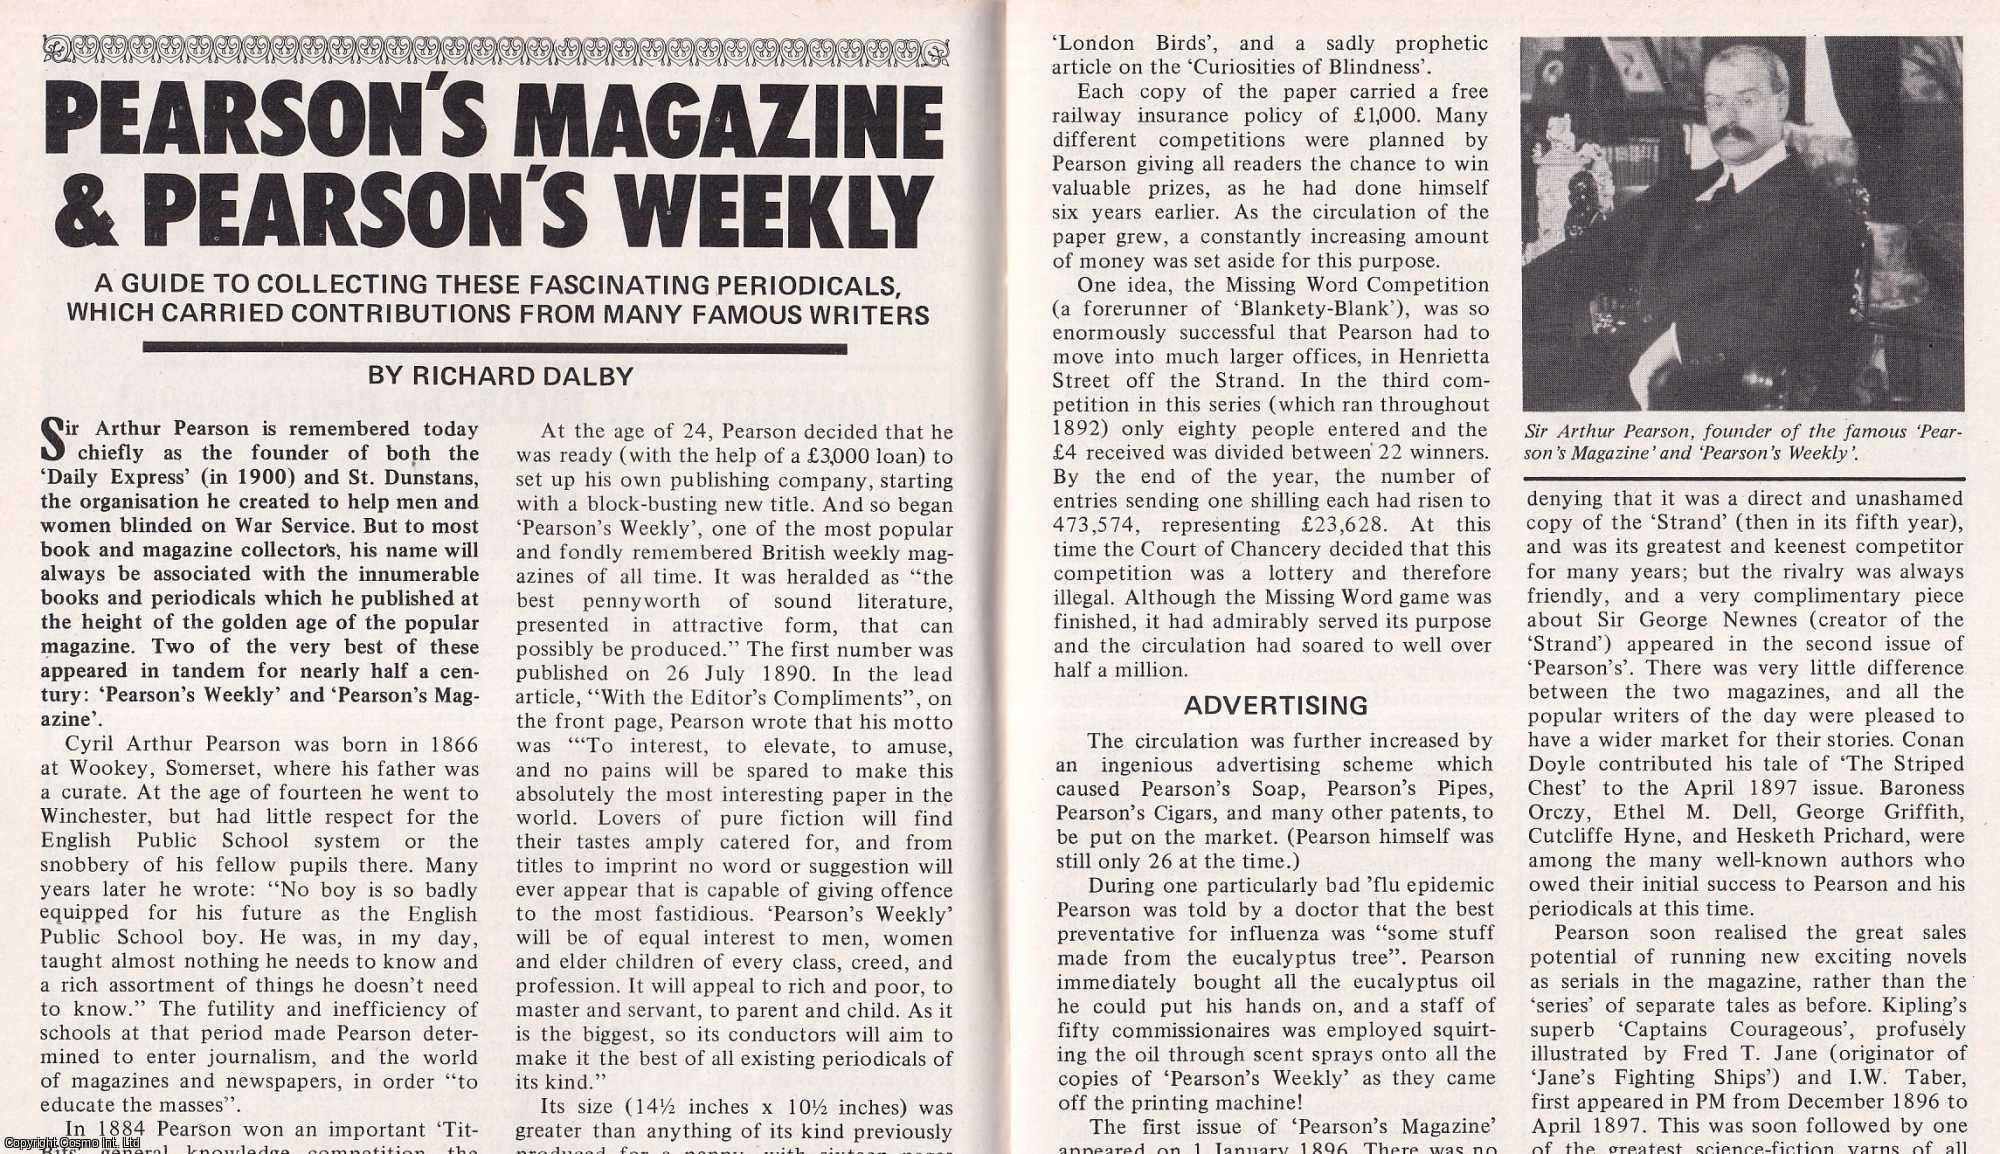 Richard Dalby - Pearson's Magazine & Pearson's Weekly Periodicals. This is an original article separated from an issue of The Book & Magazine Collector publication, 1985.